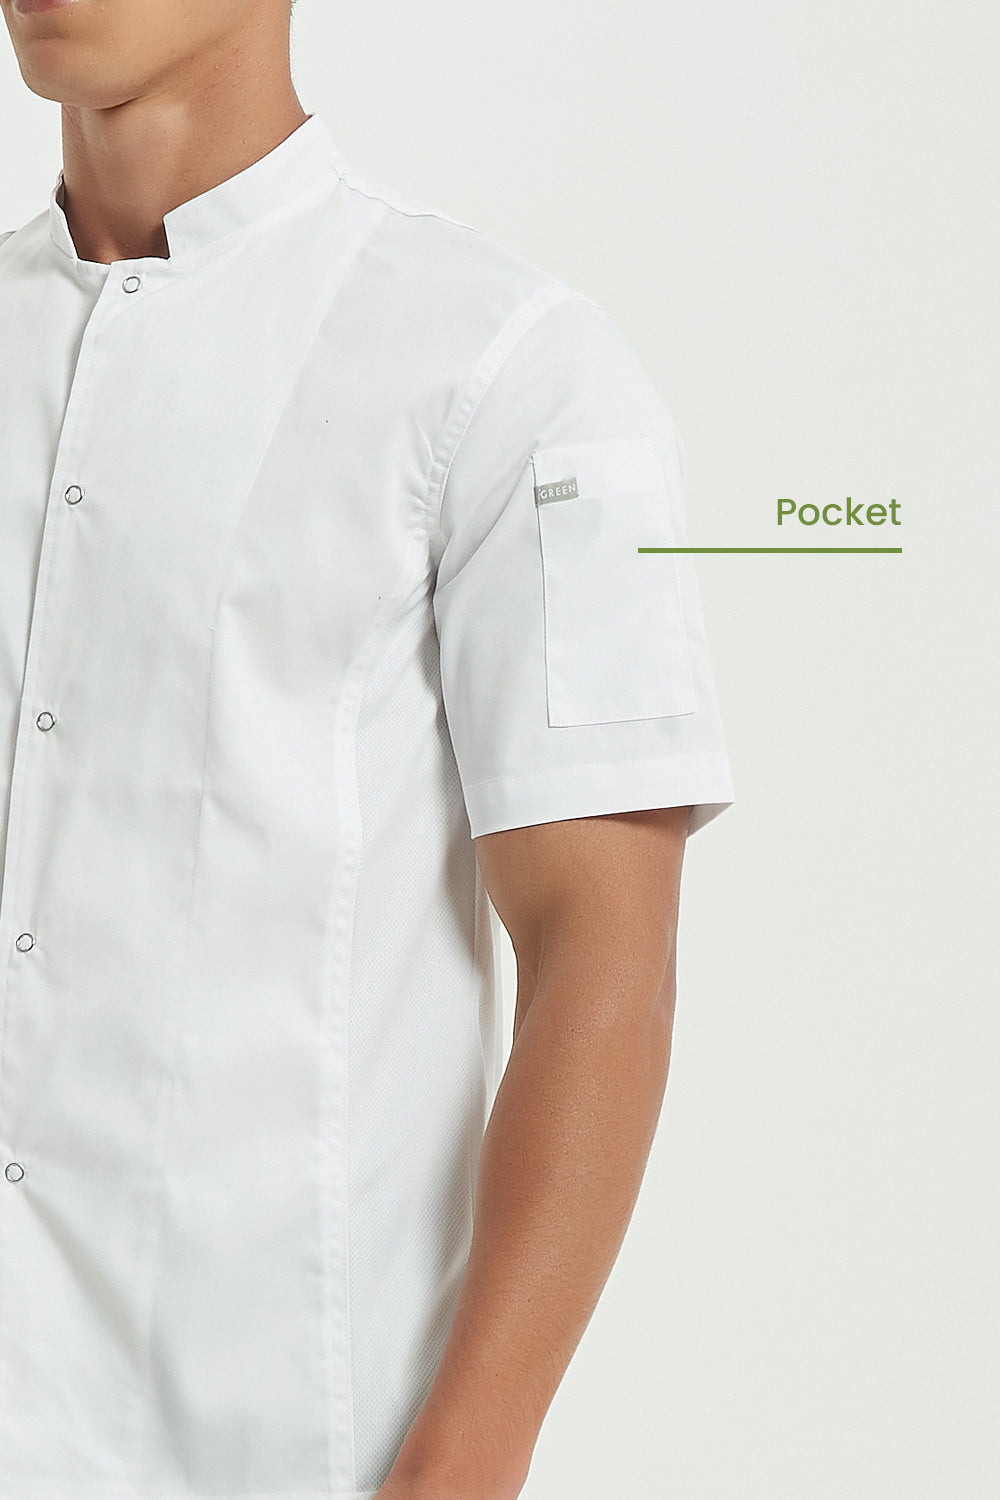 Mint Chef Jacket Short Sleeve with Dri-fit, Side View